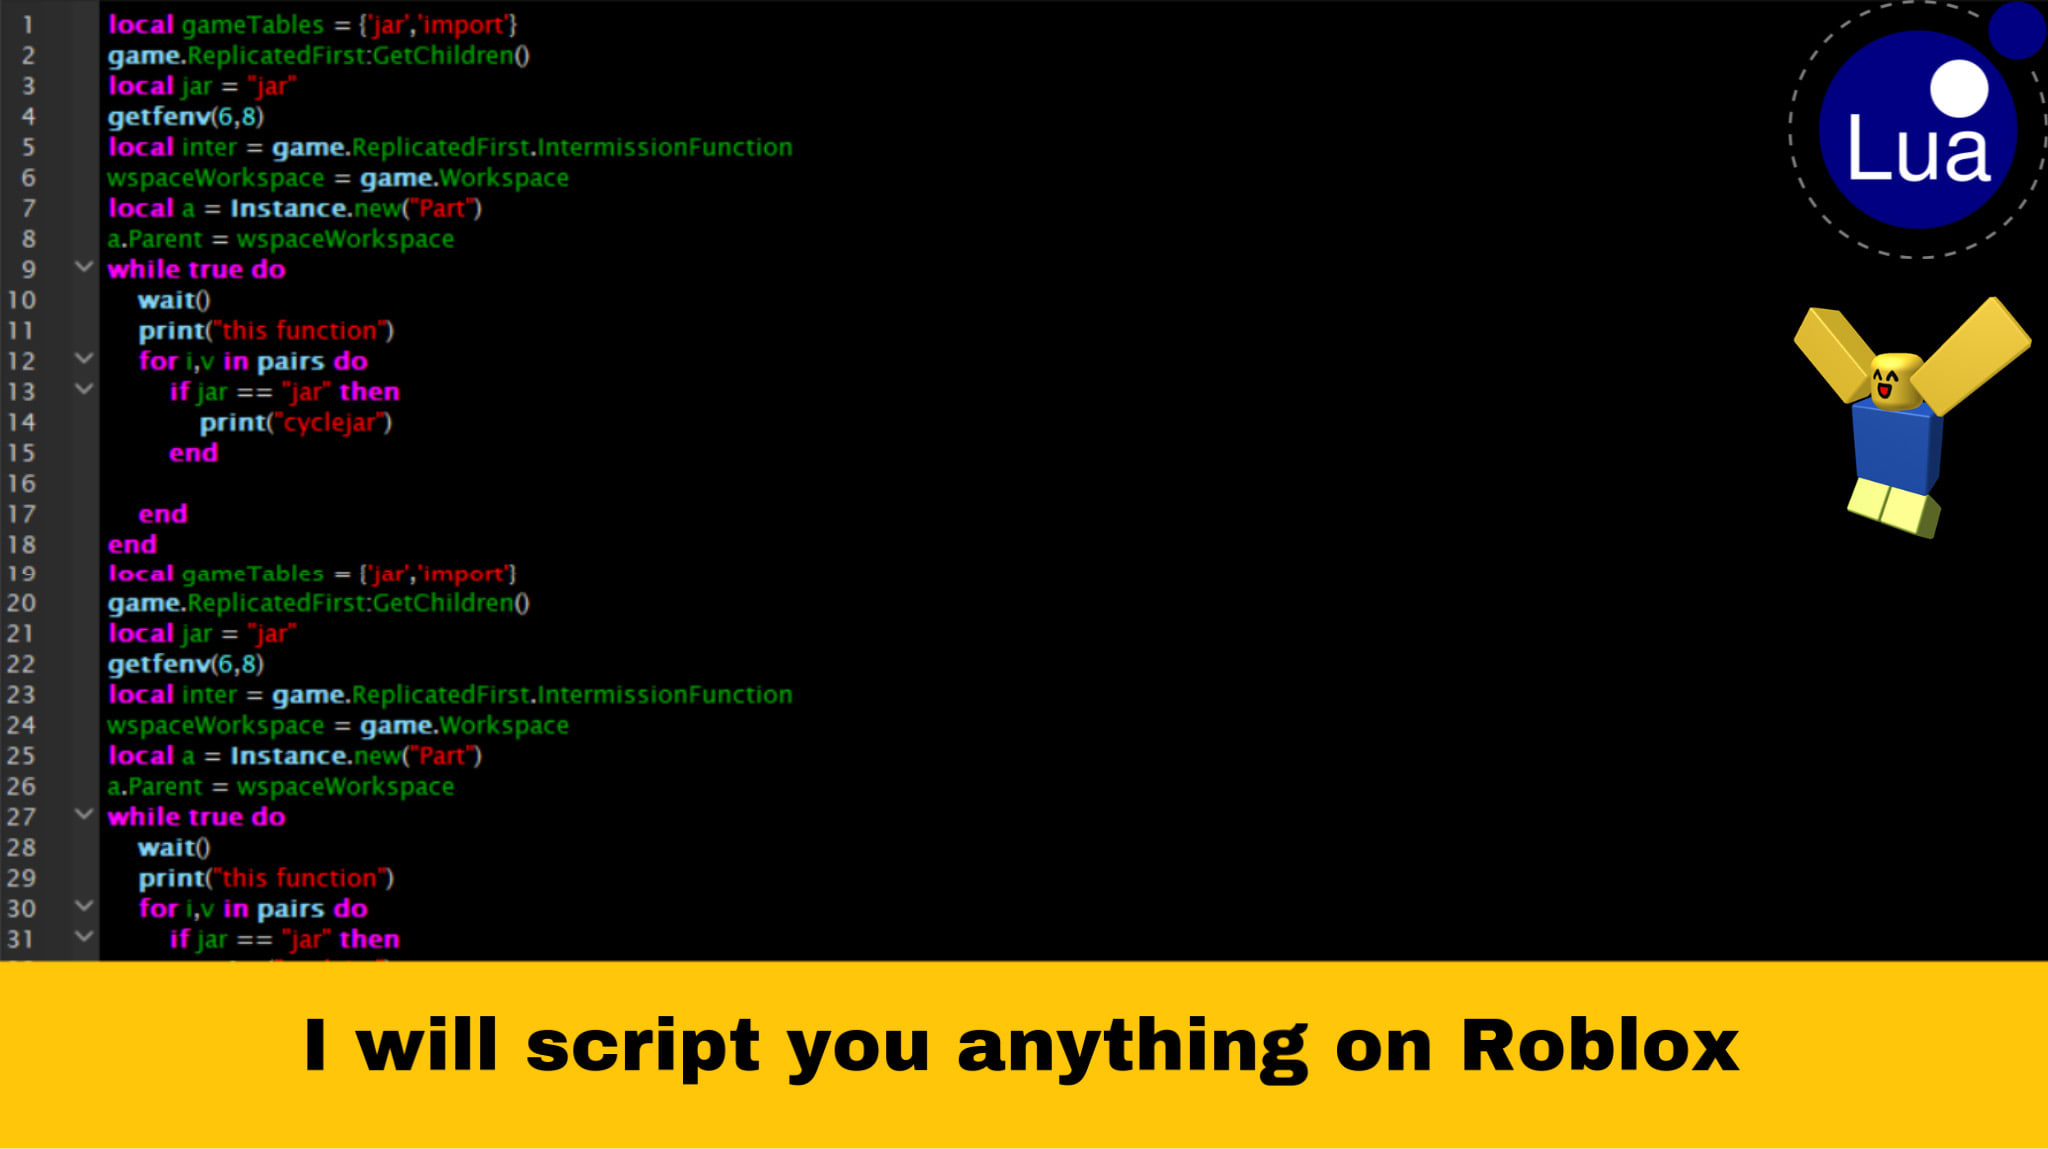 Make A Script Or A System For You On Roblox By Frepzter - roblox 18 script